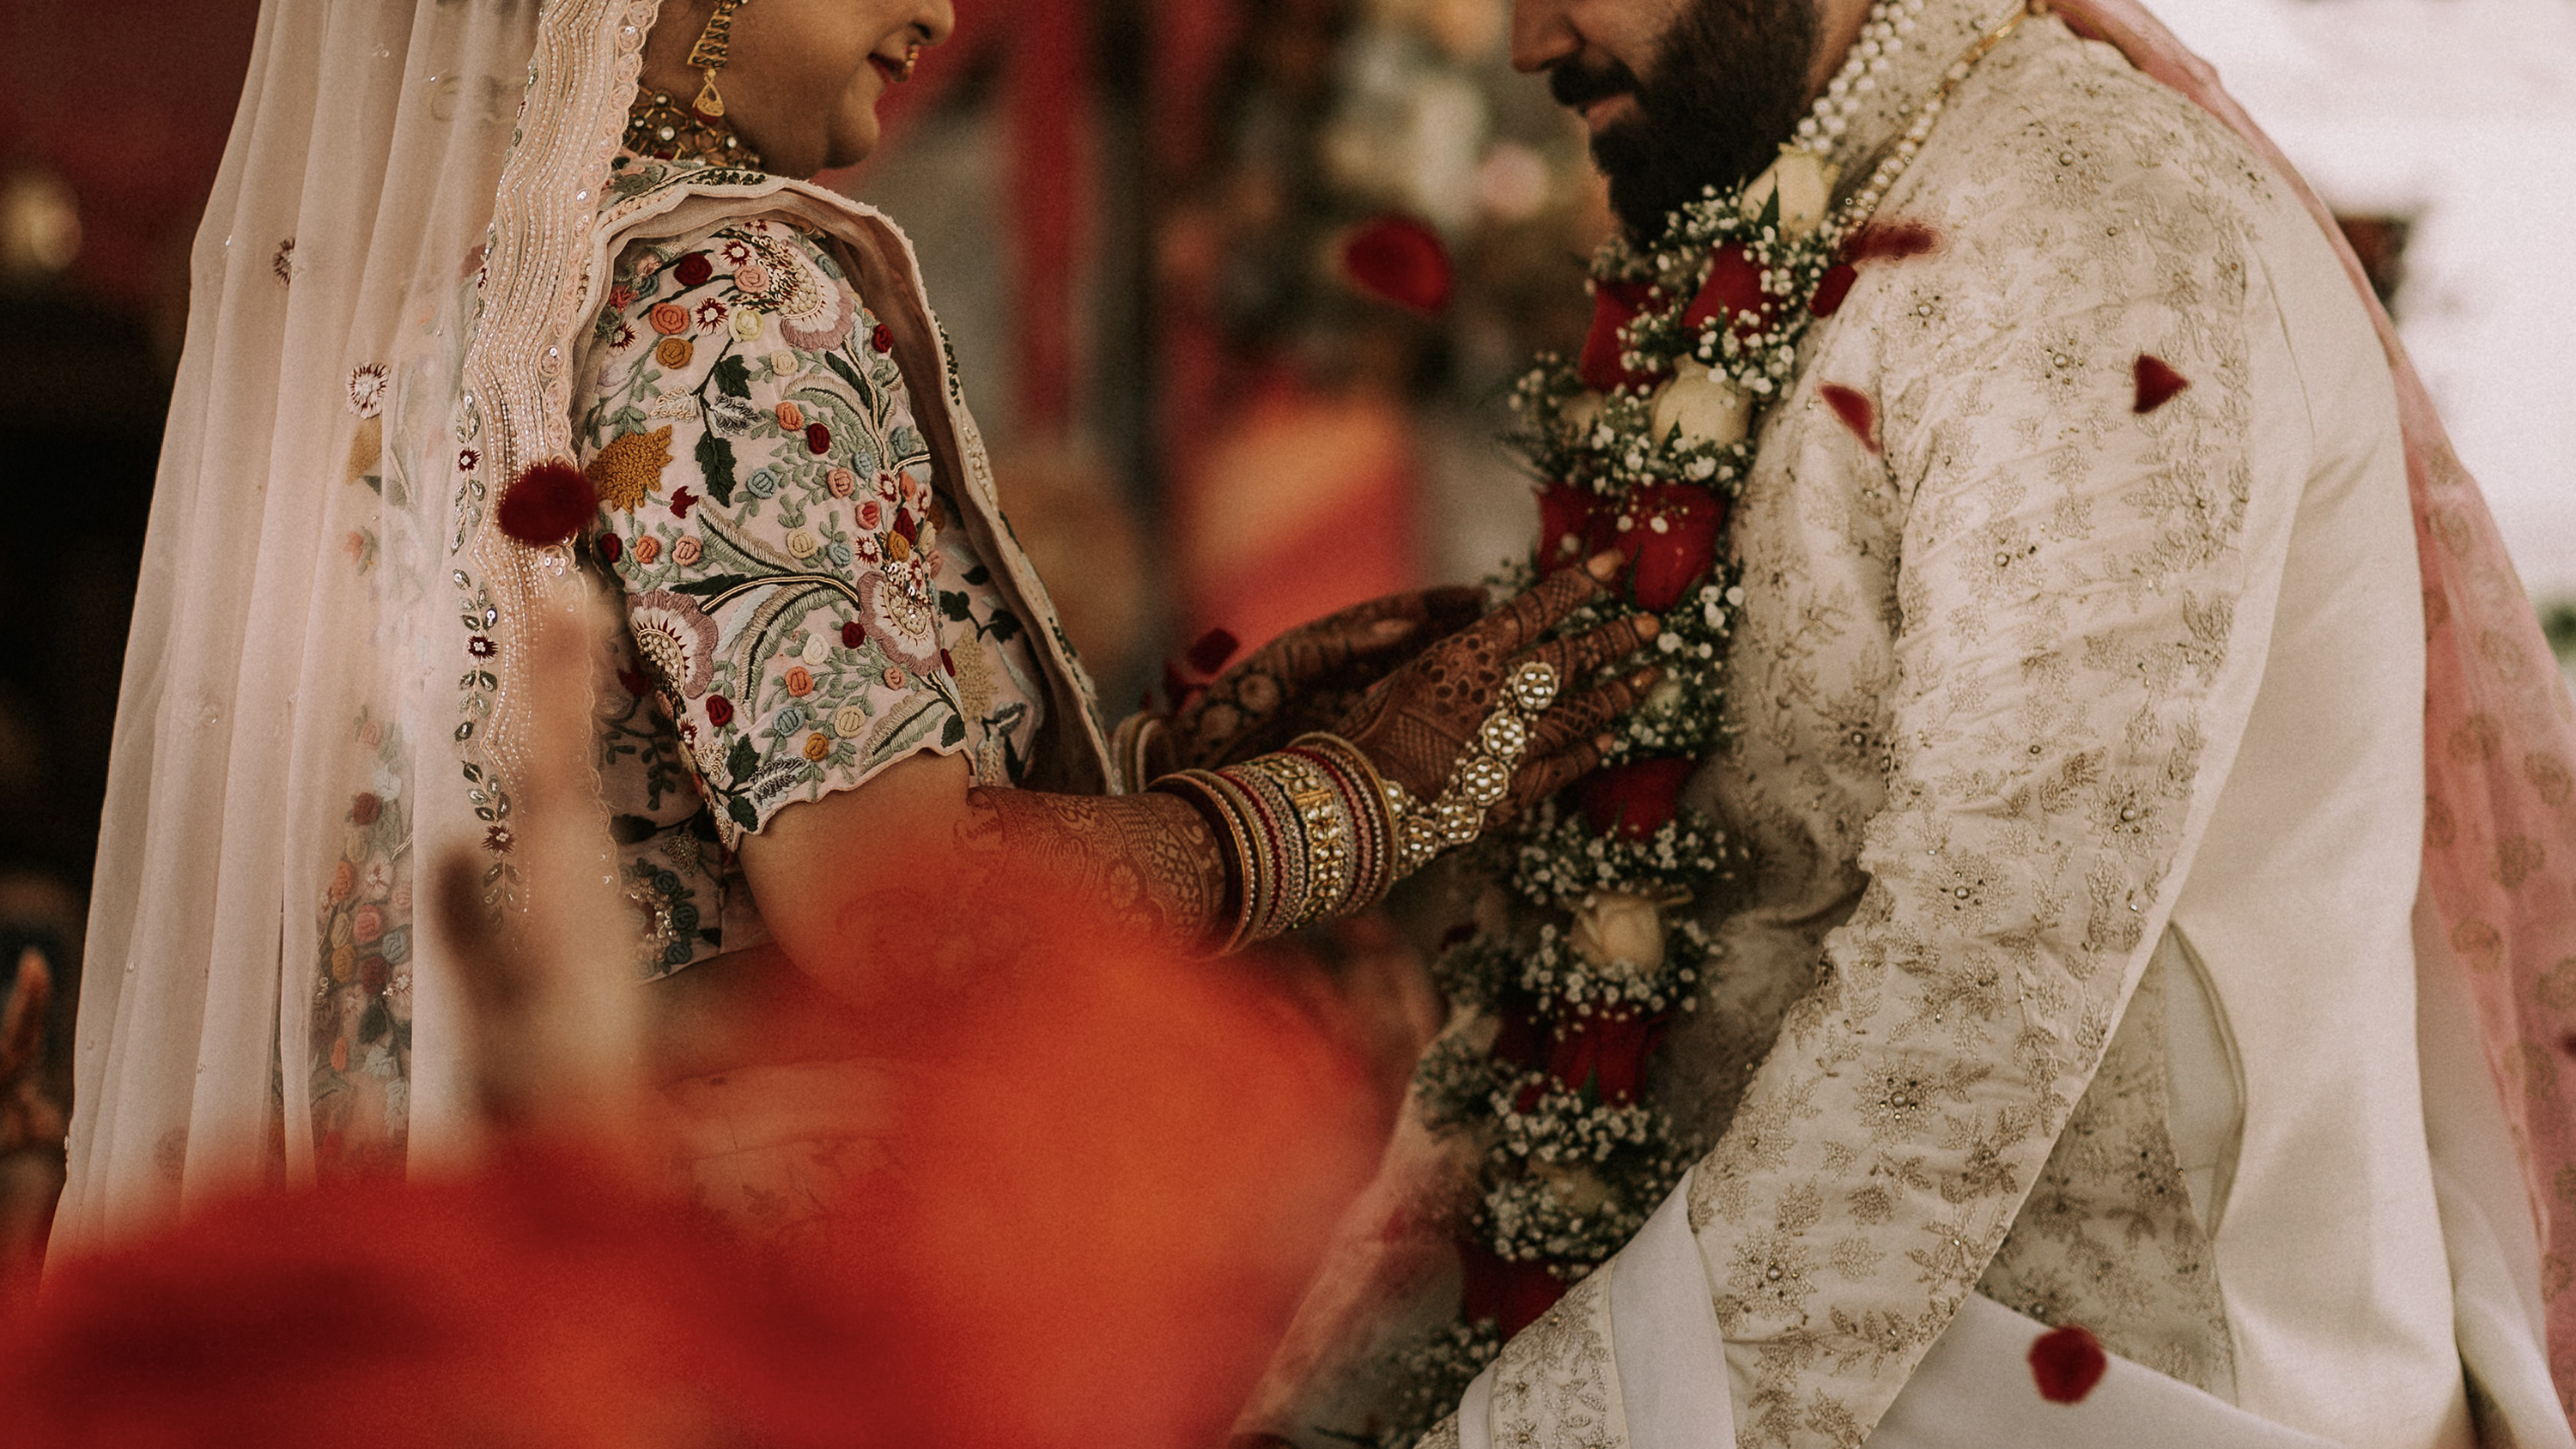 Arranged or Not, Indian Christians Praise God for Their Marriages..